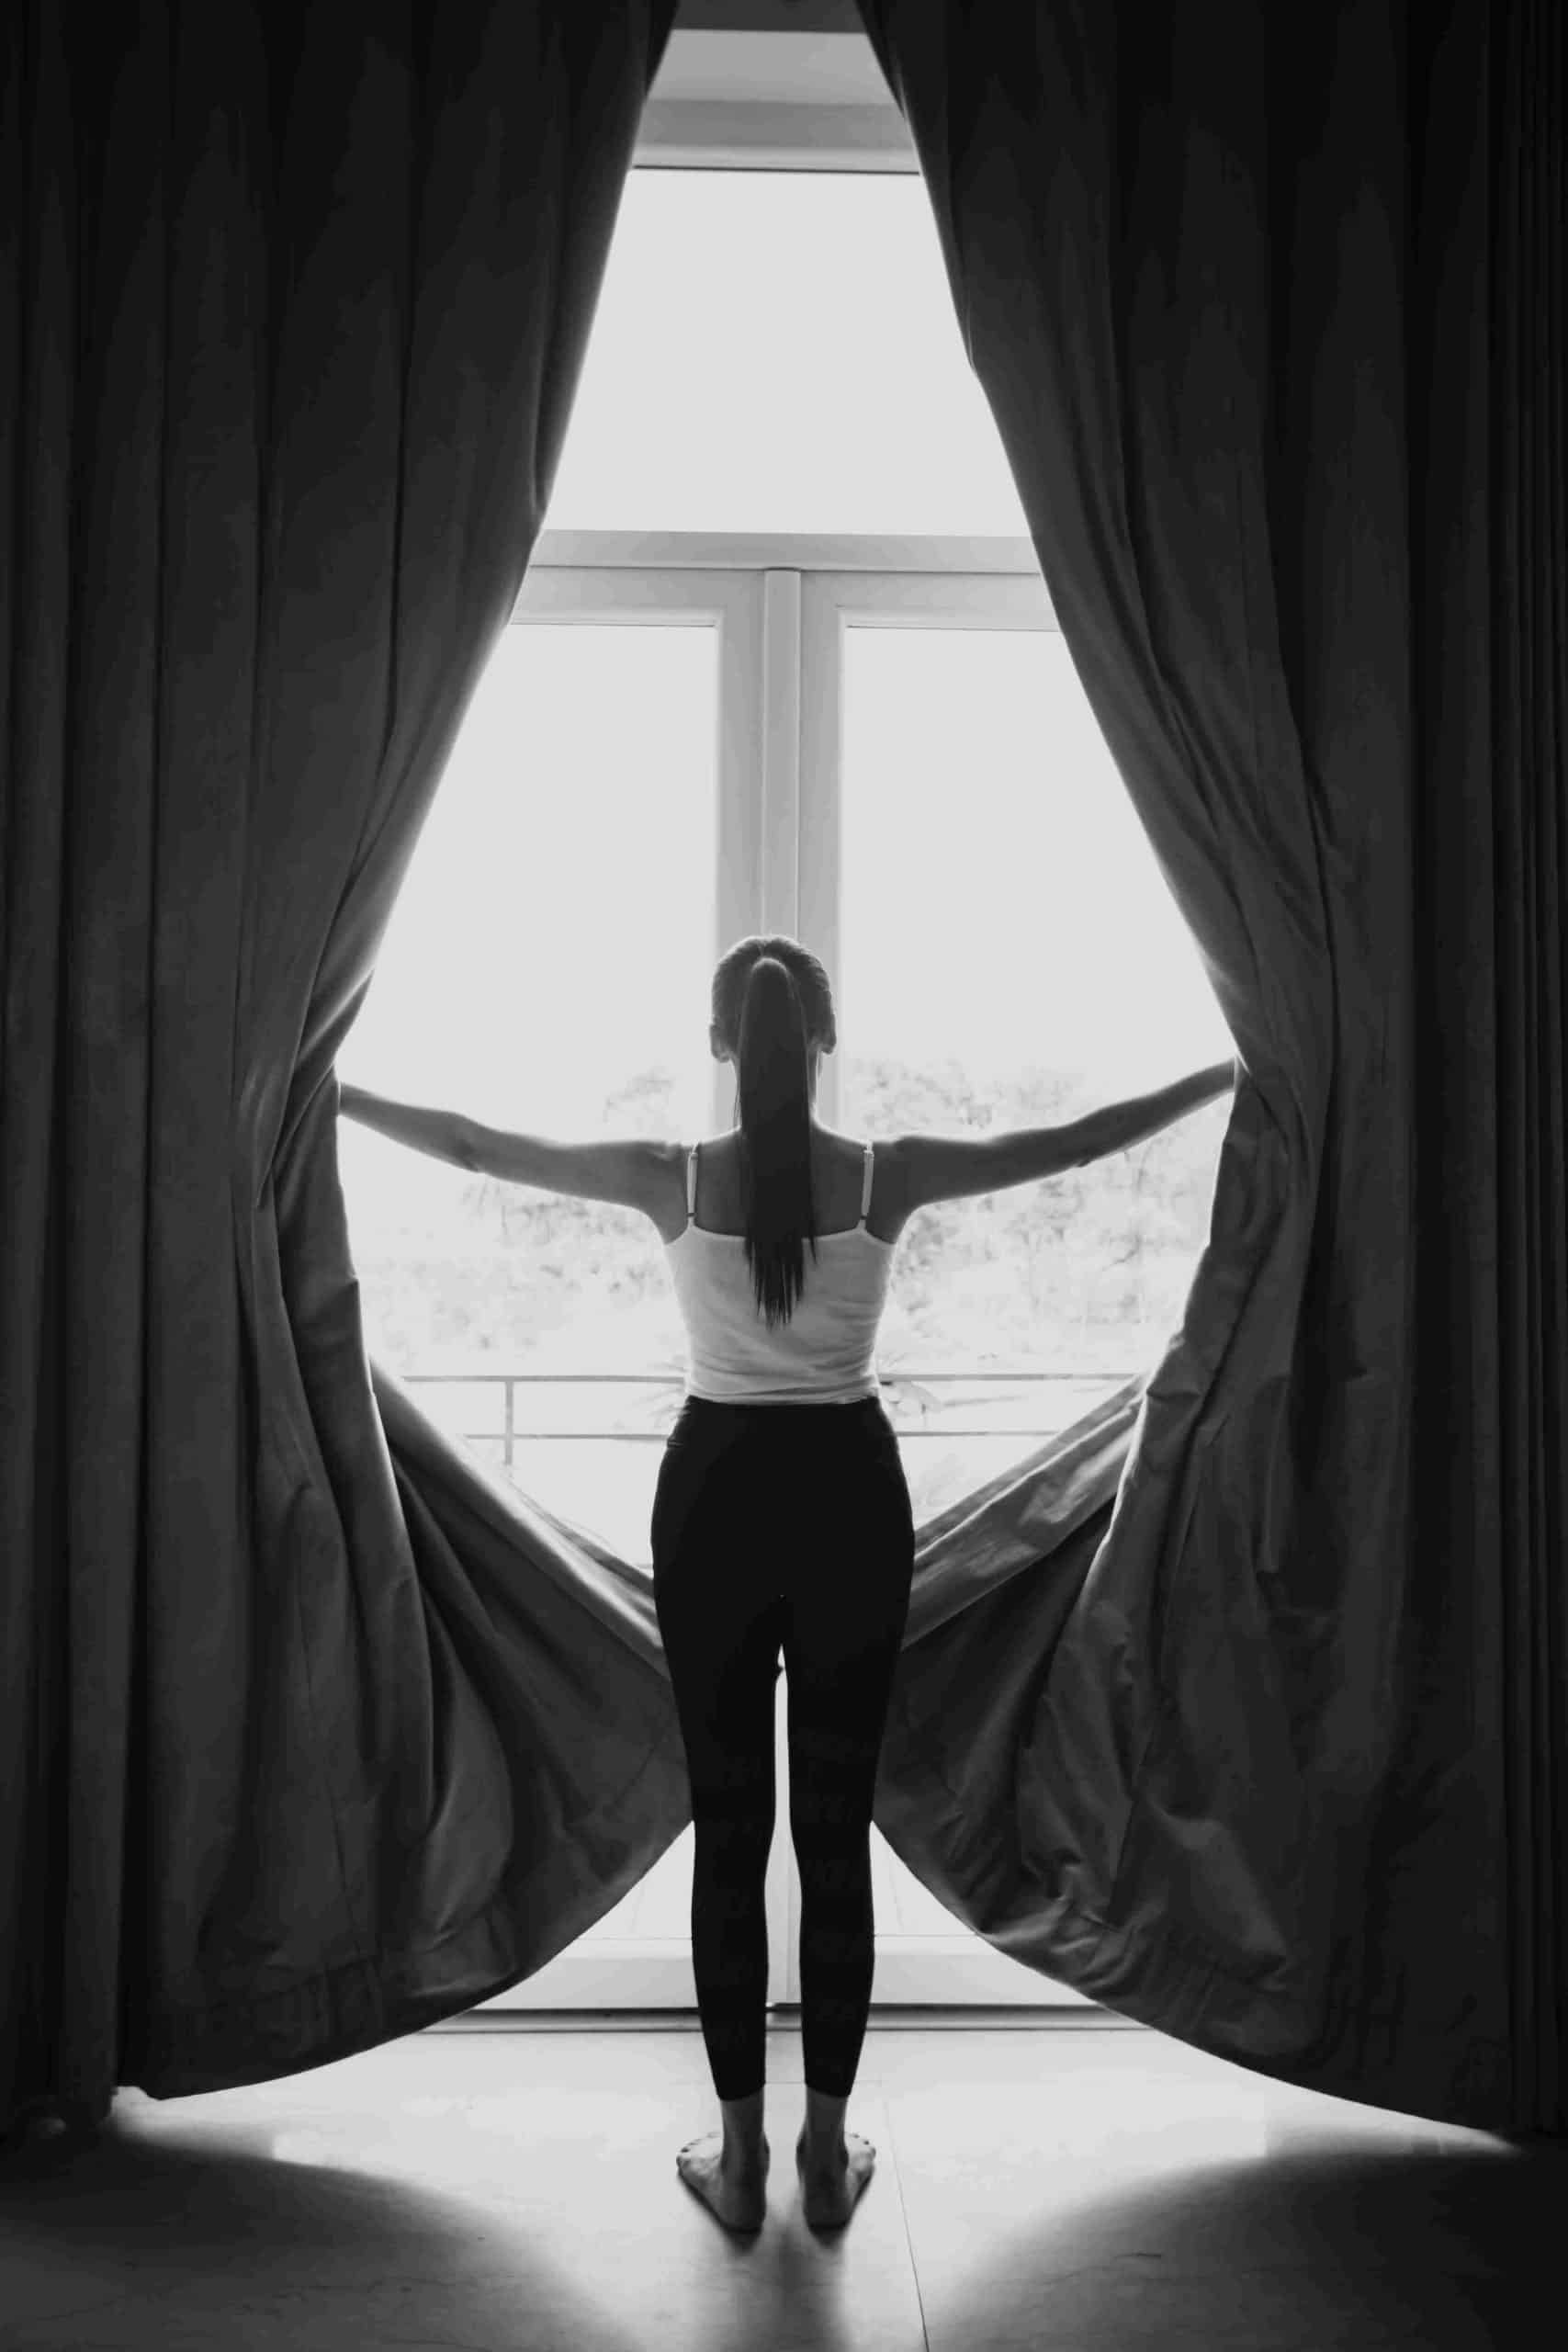 a girl standing in front of her glass and upvc fenestration drawing the curtains away